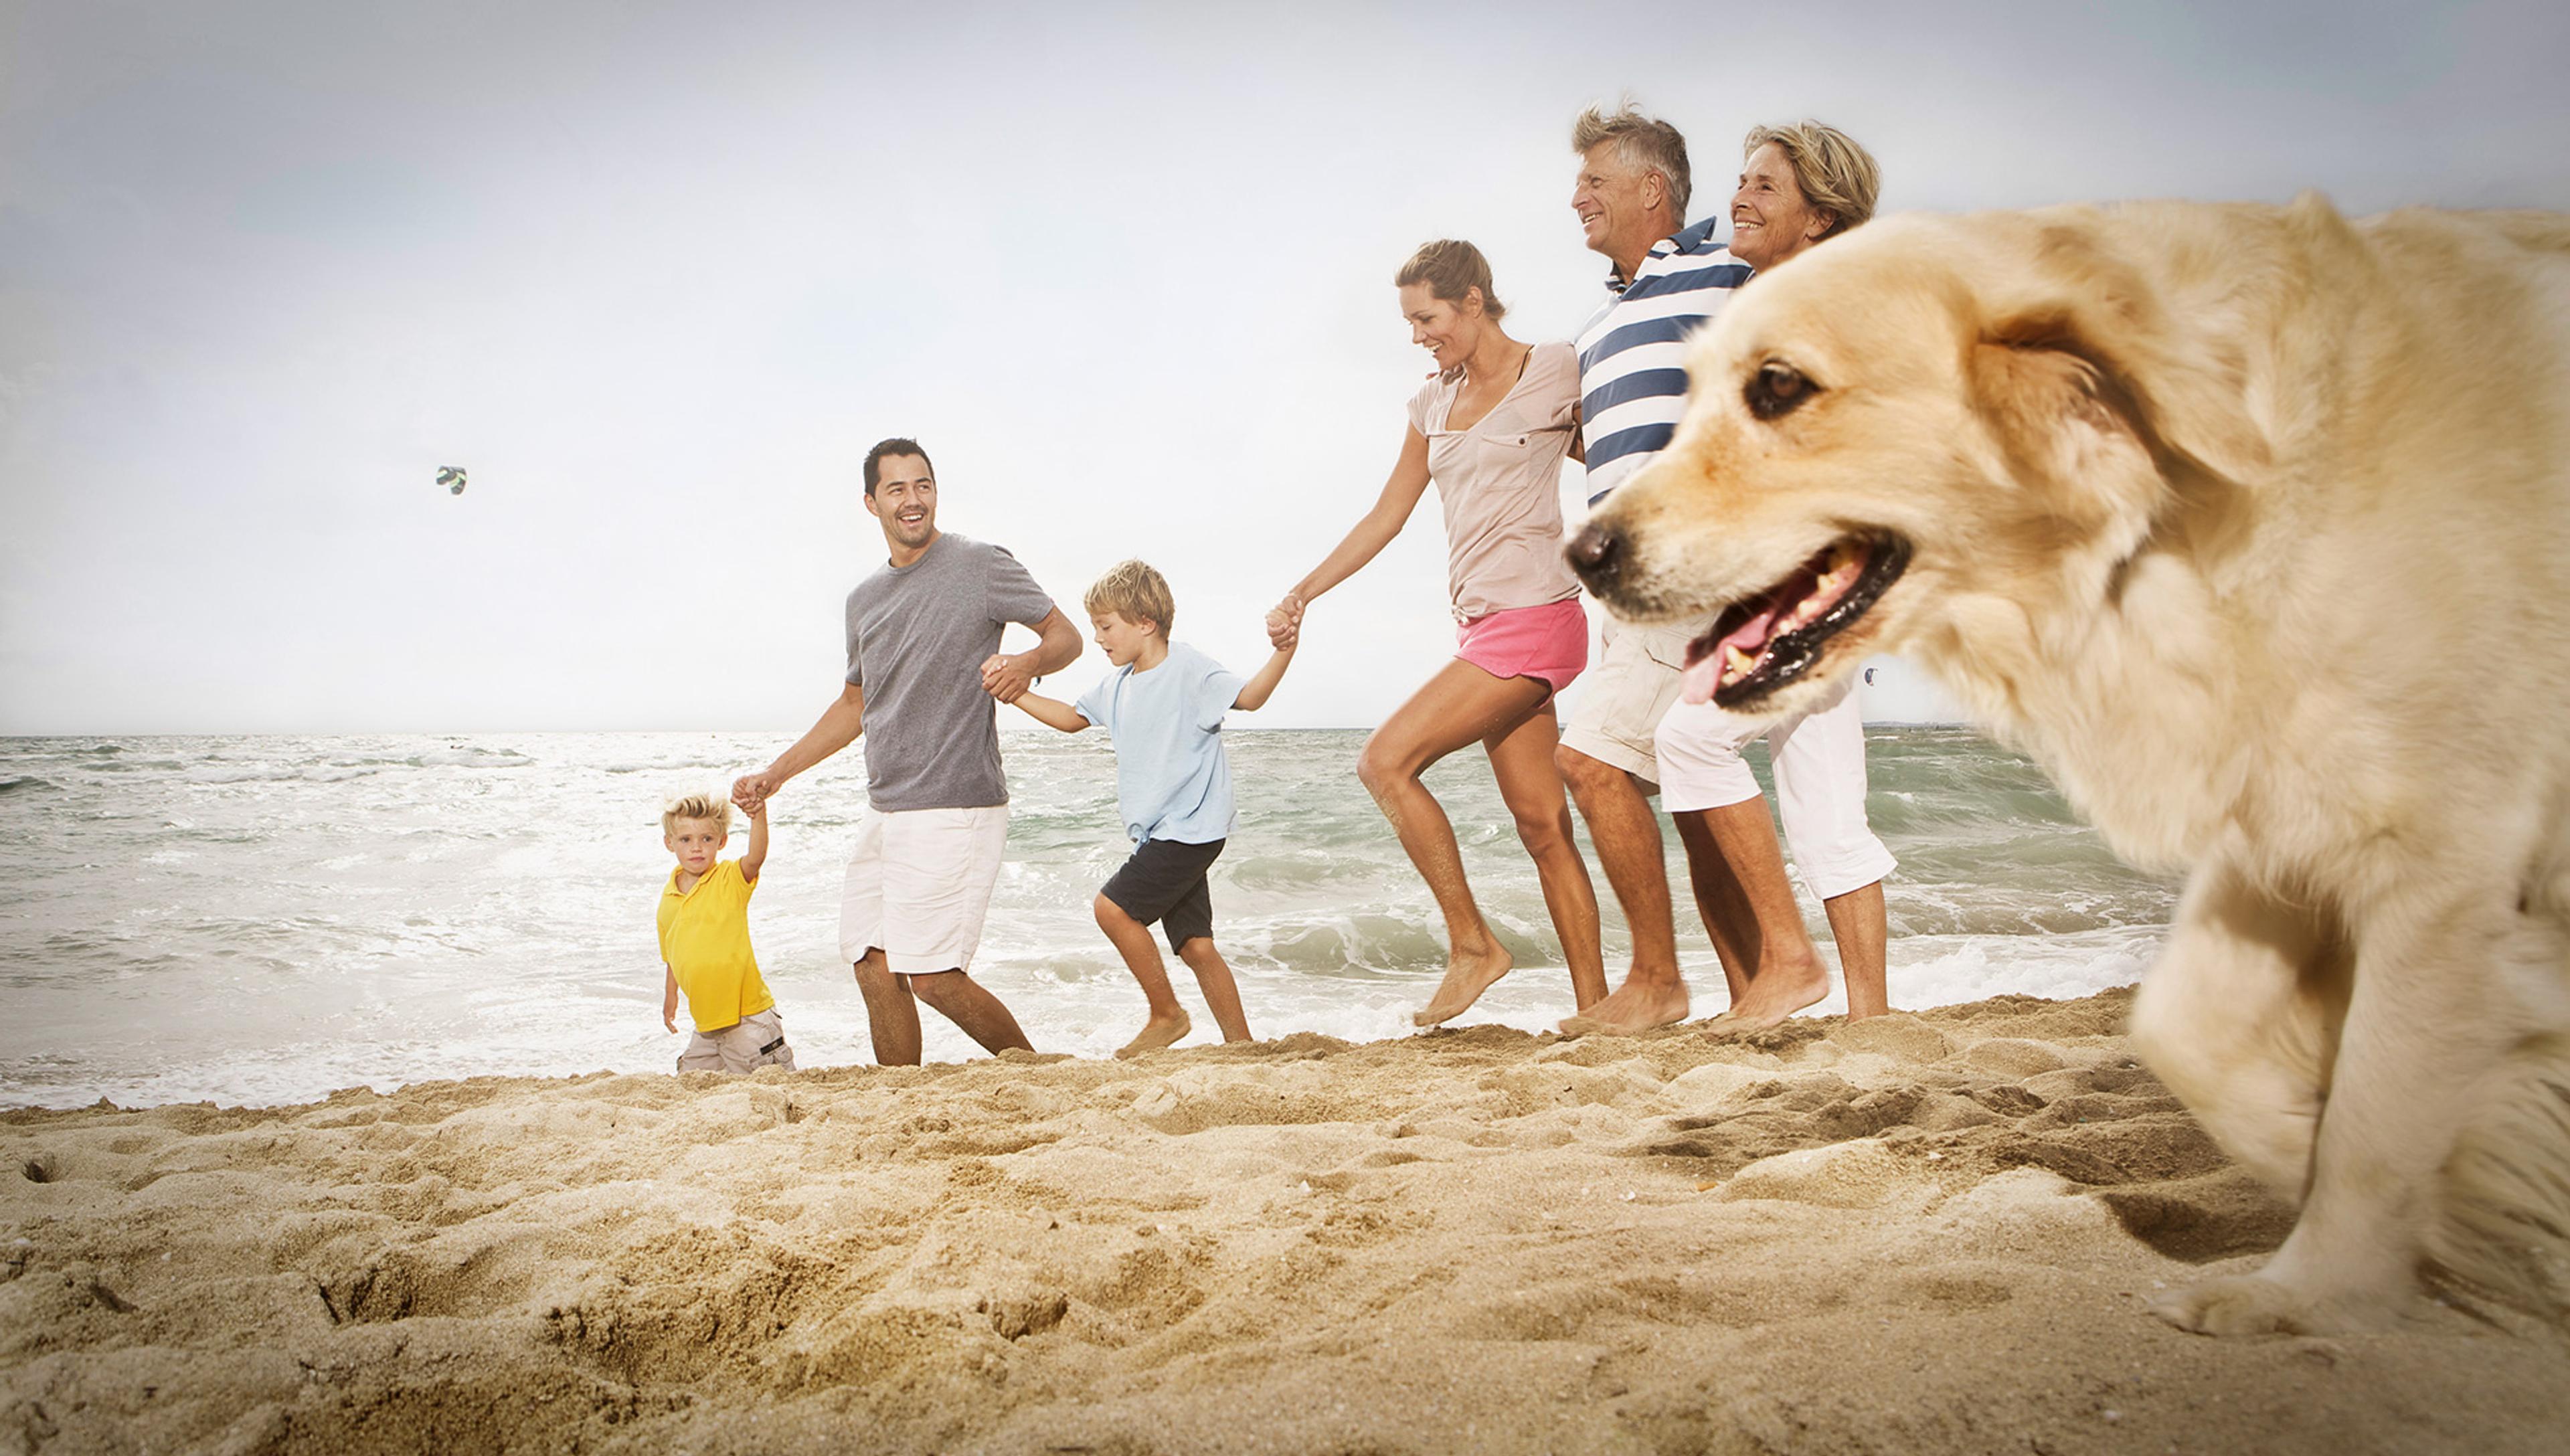 A smiling family hold hands and play on a sunny beach with their retriever dog